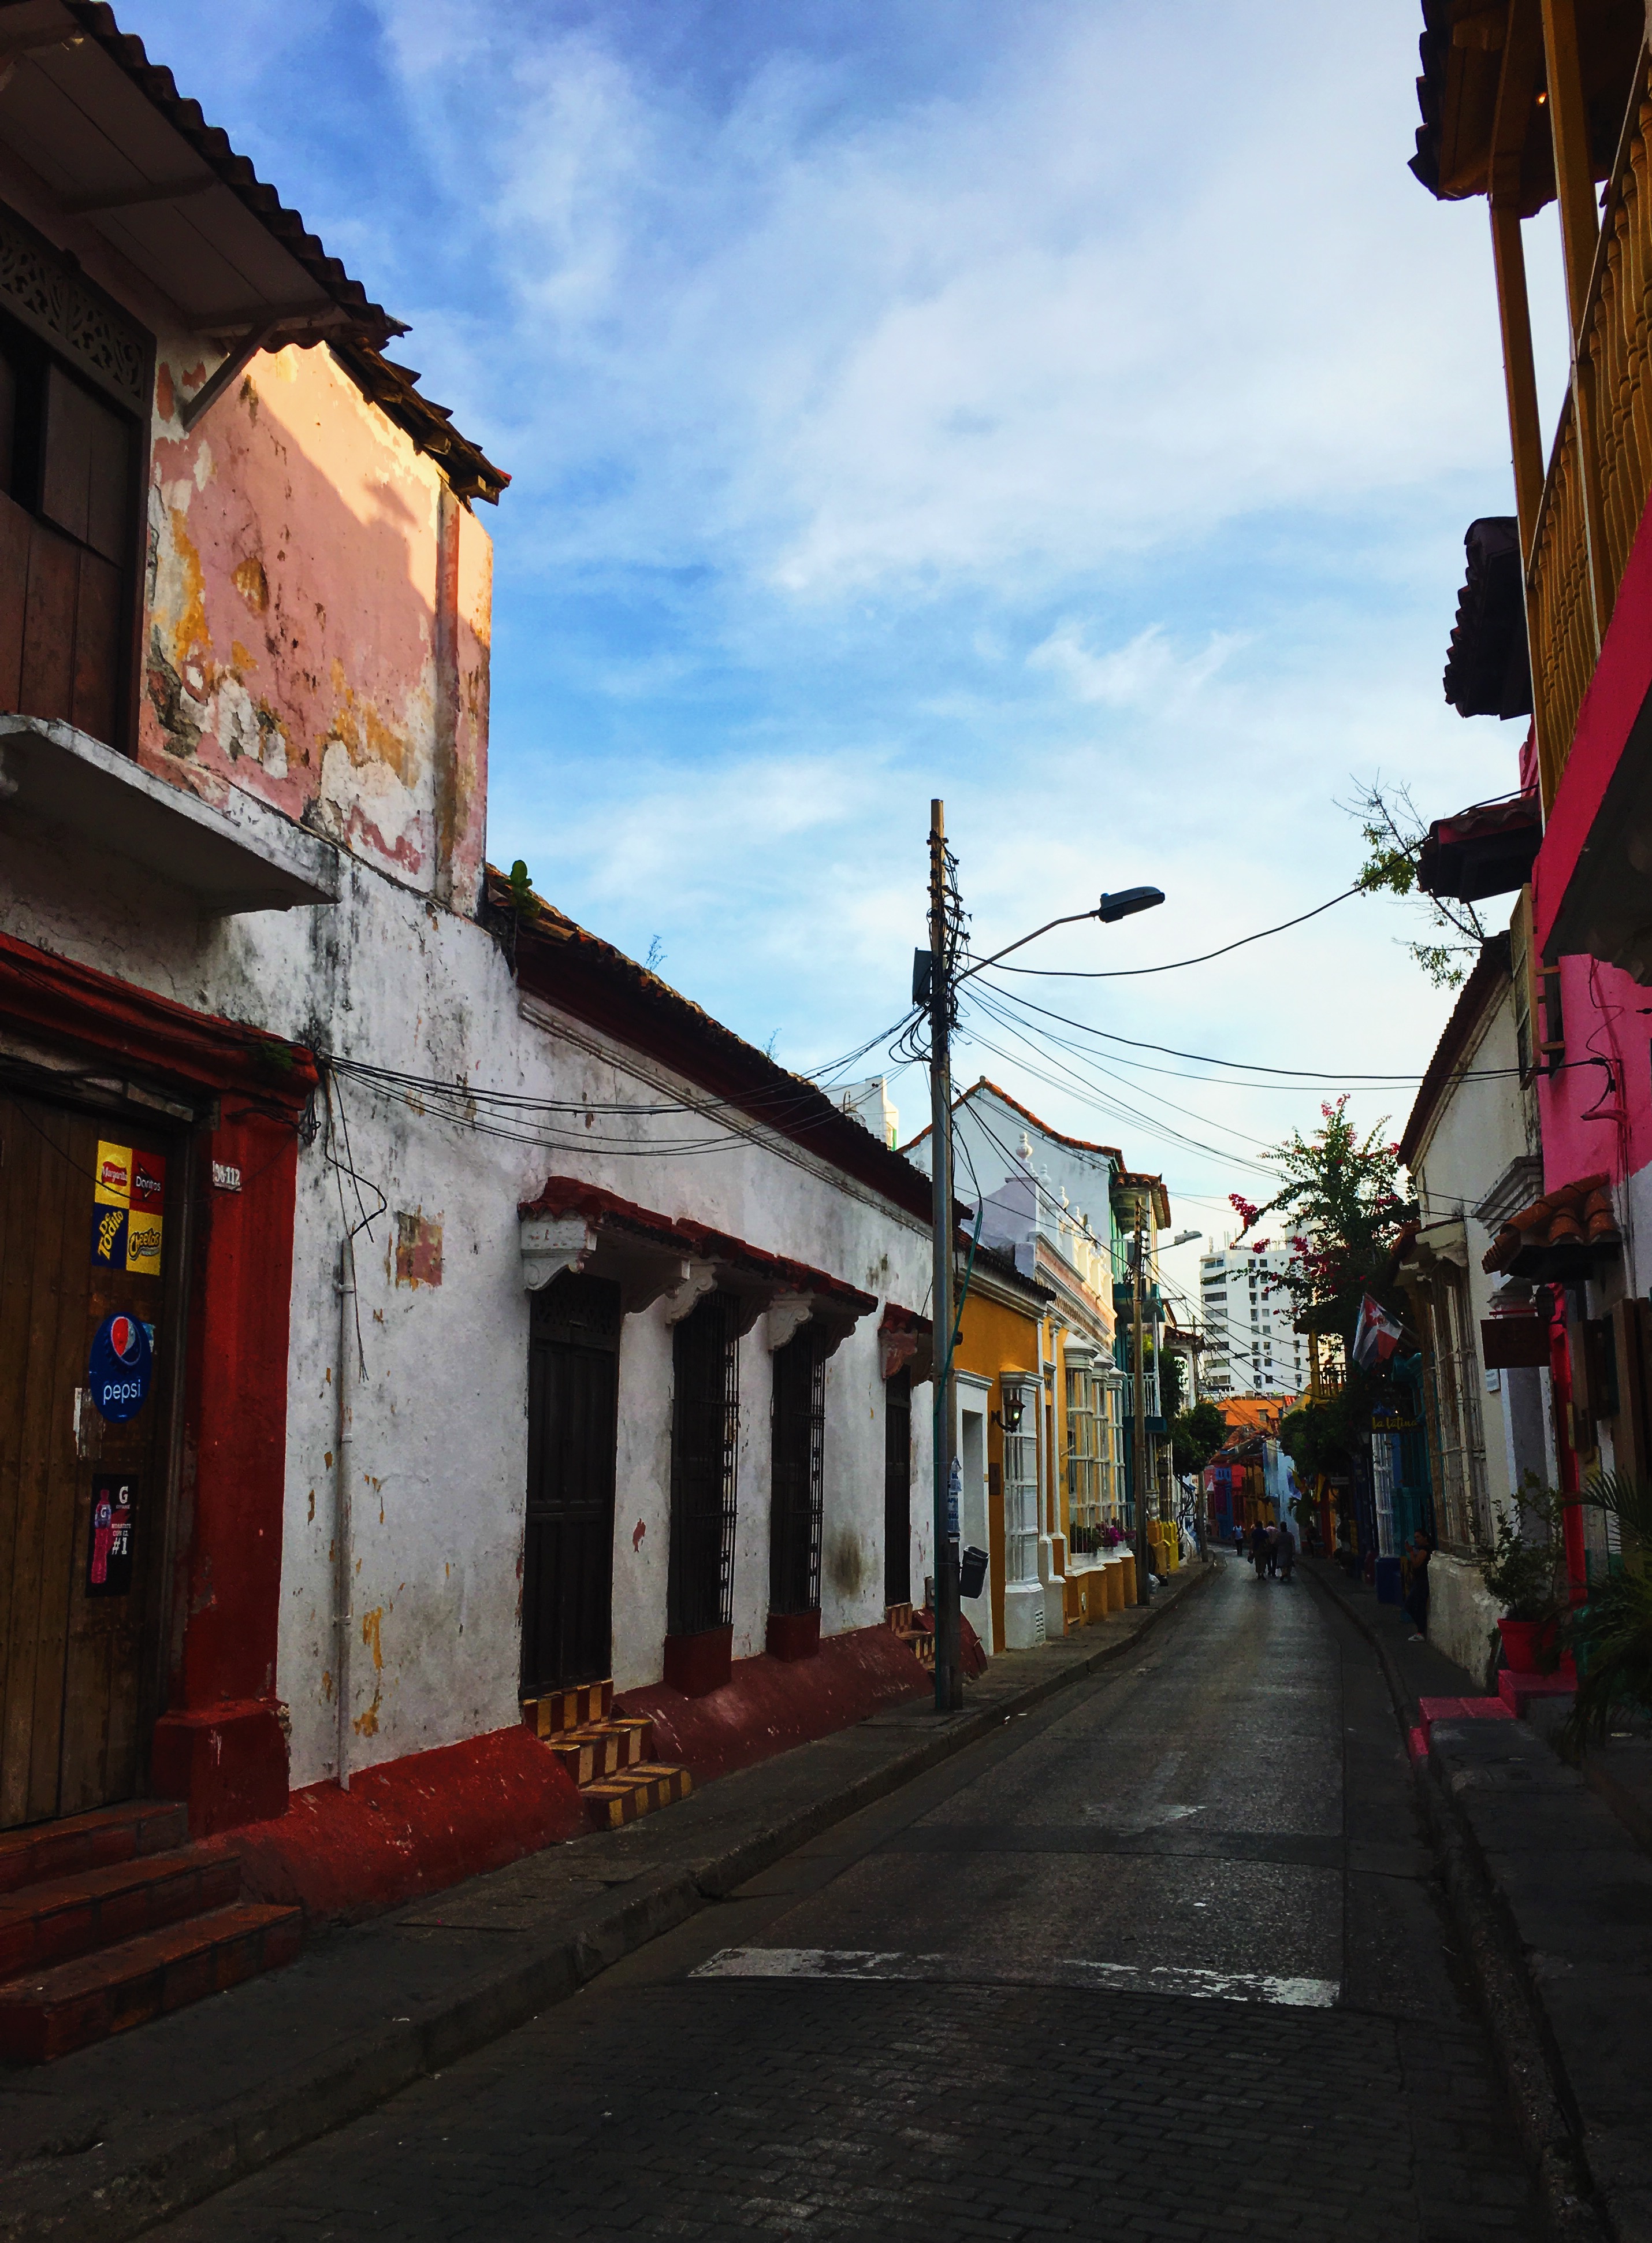 lcm-liveclothesminded-colombia-cartagena-walled city-old town